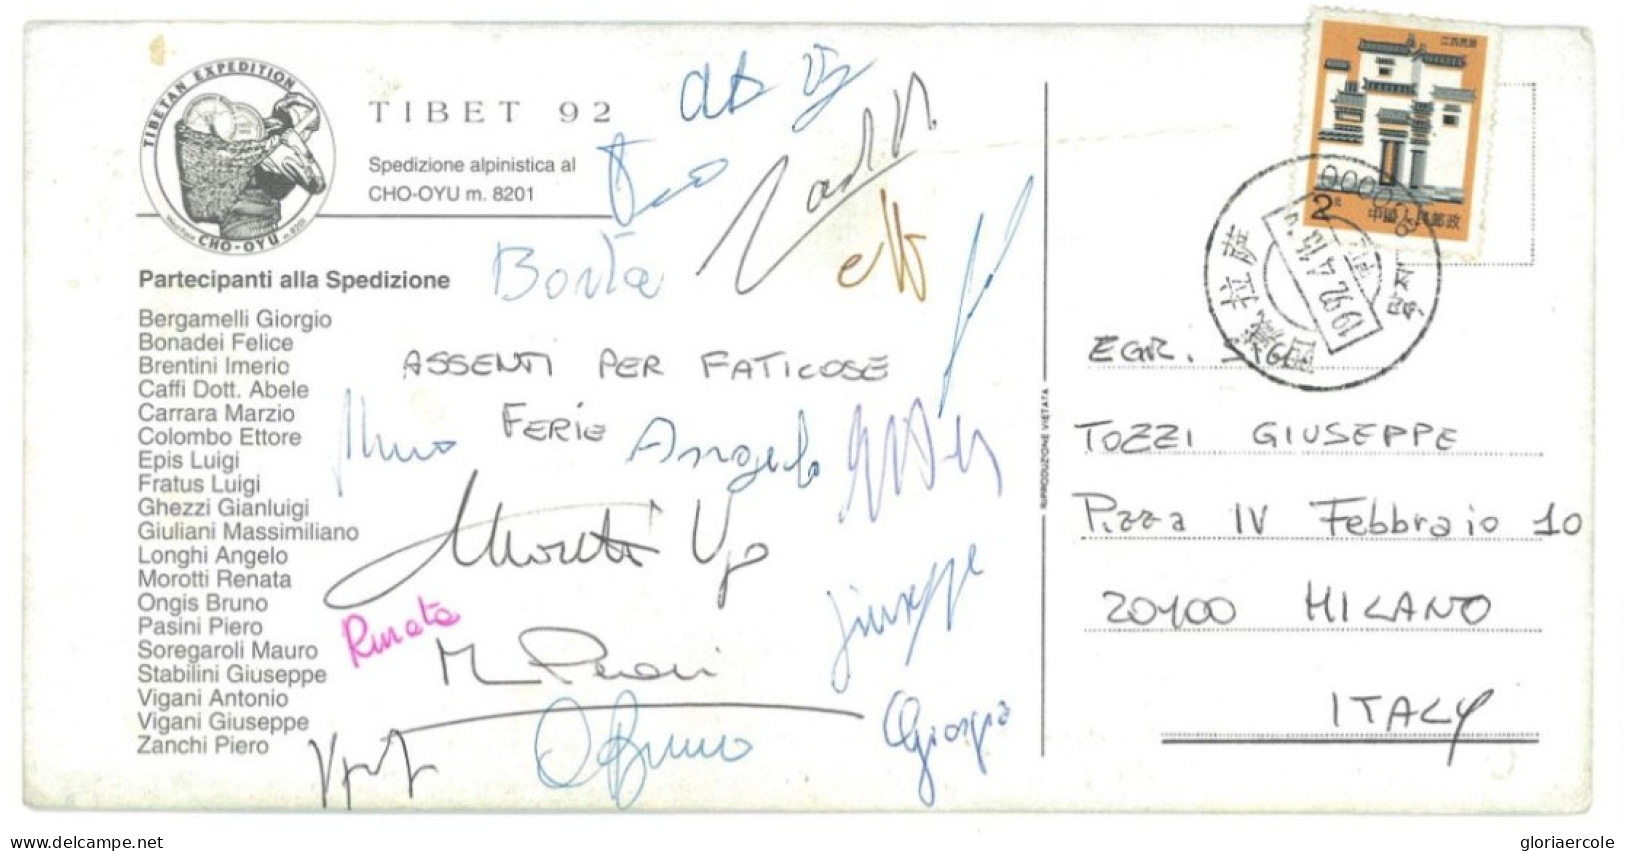 P2834 - MOUNTANEERING, ITALIAN EXPEDITION TO THE CHO-OYU TIBET 1992 SIGNED BY MOST OF THE MEMBERS. - Climbing